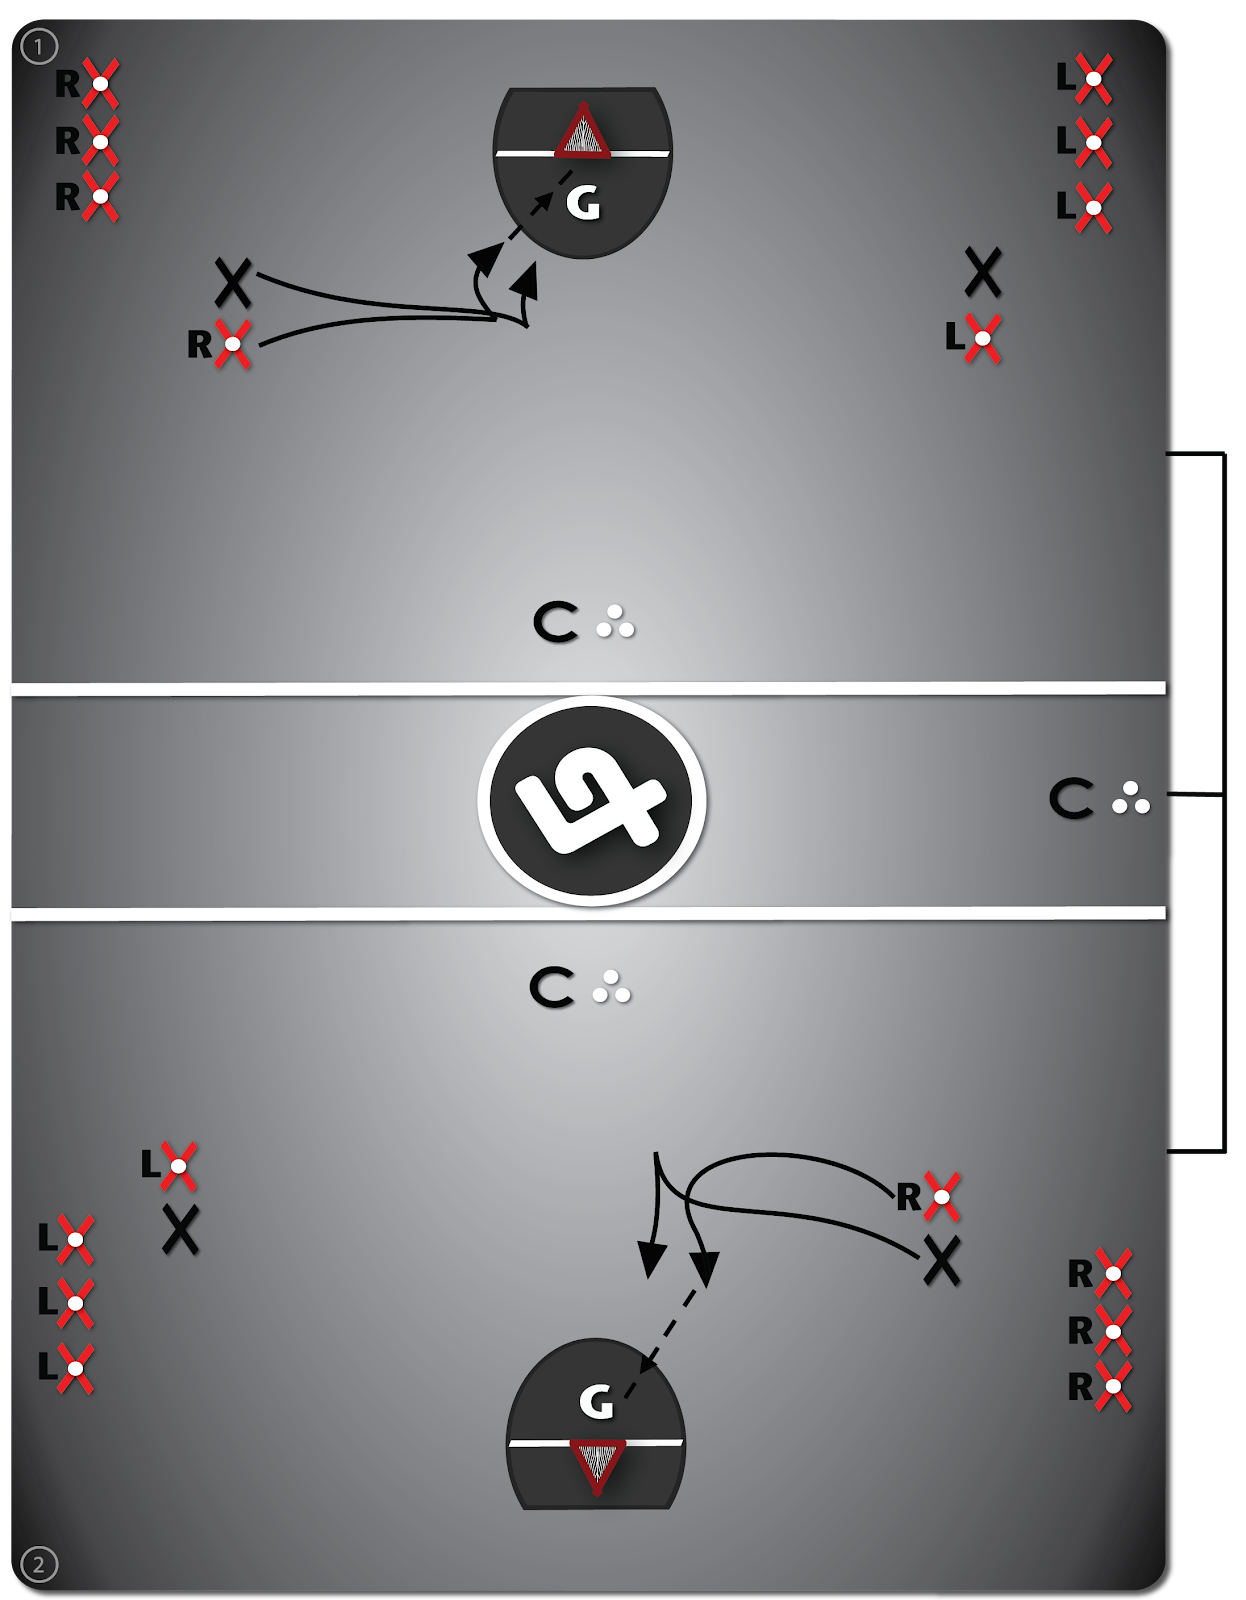 Lacrosse drill diagram for basic defense improvement - Drill #2 titled Recover Top-Side